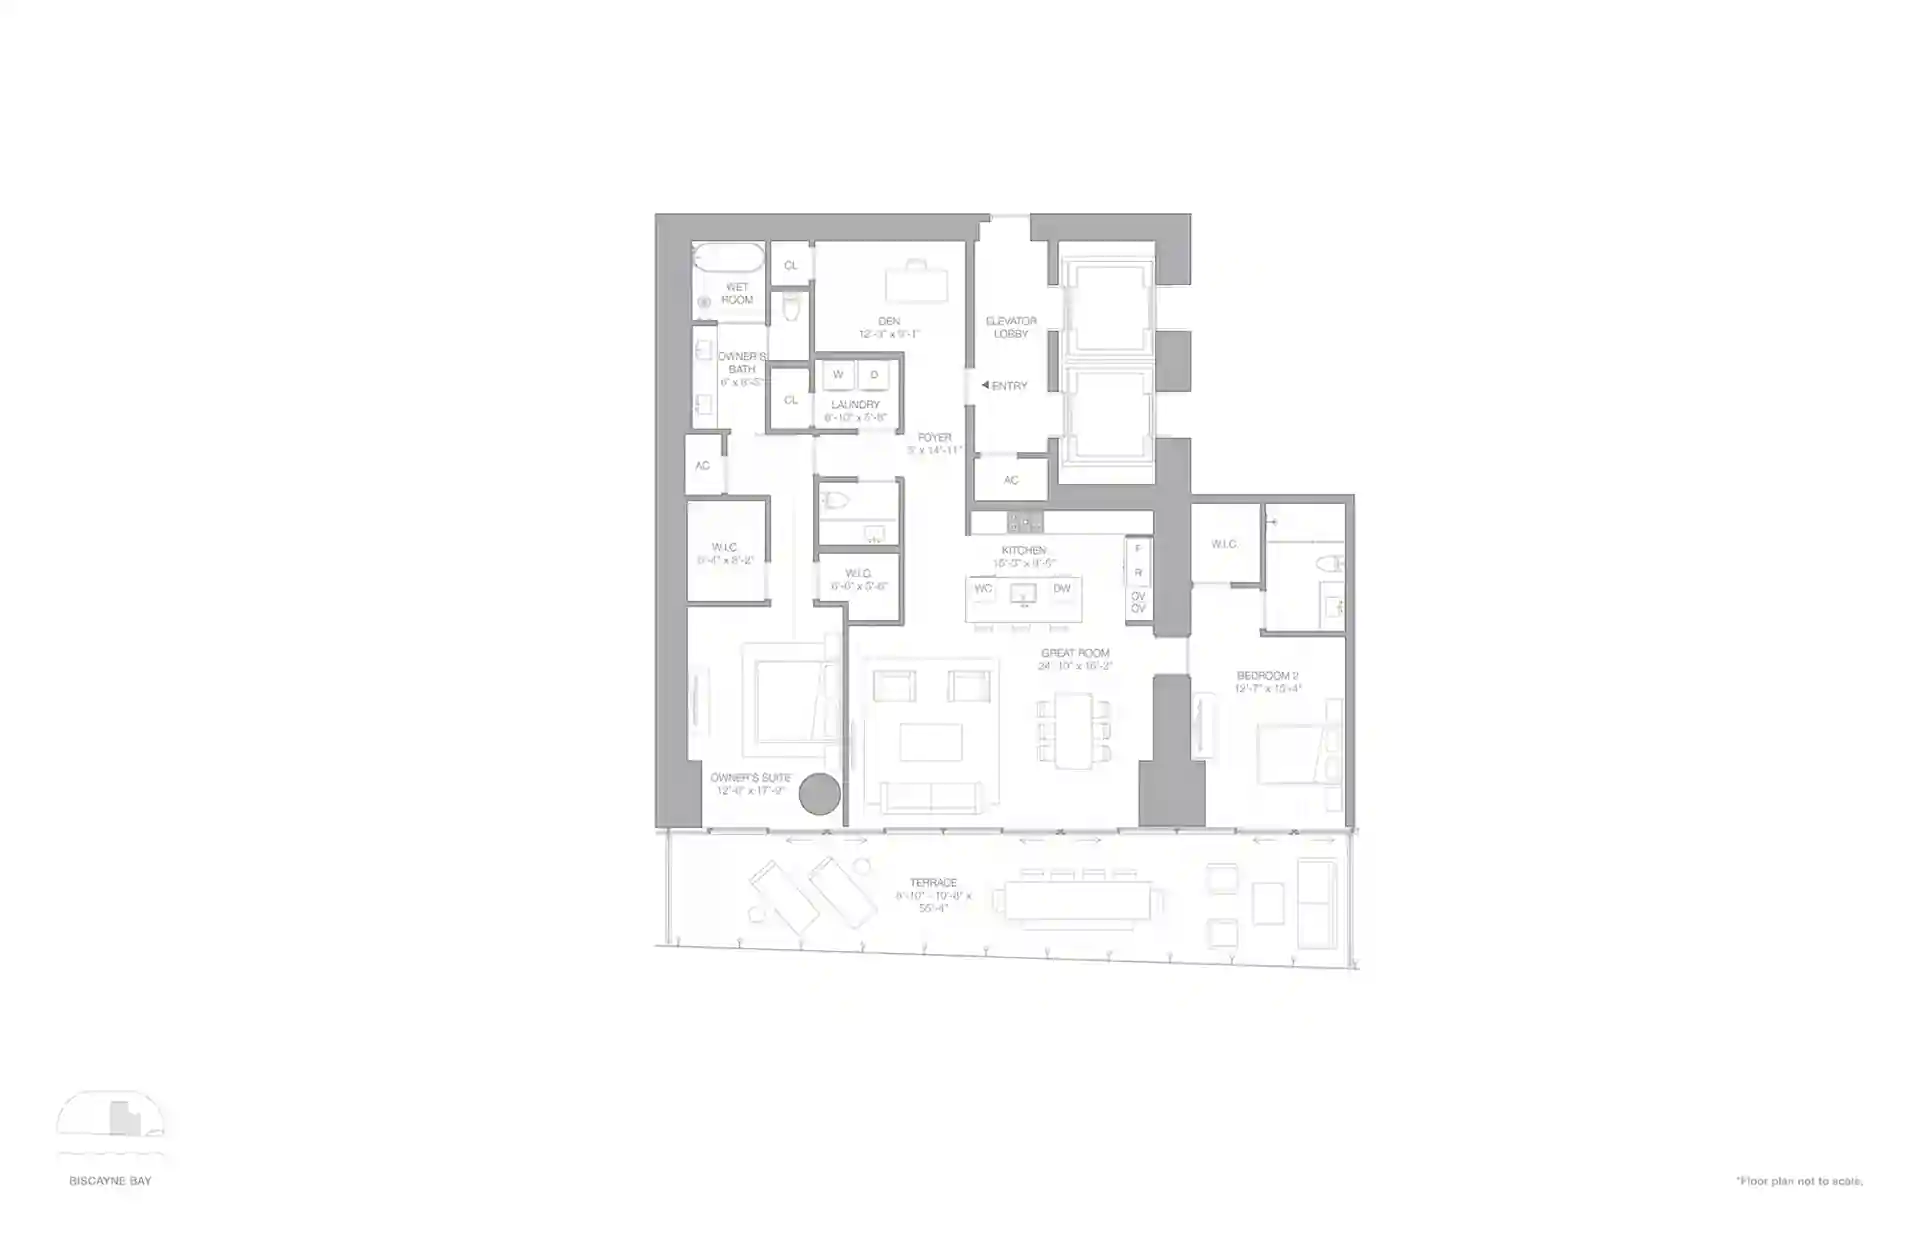 Blueprint map of the residence home